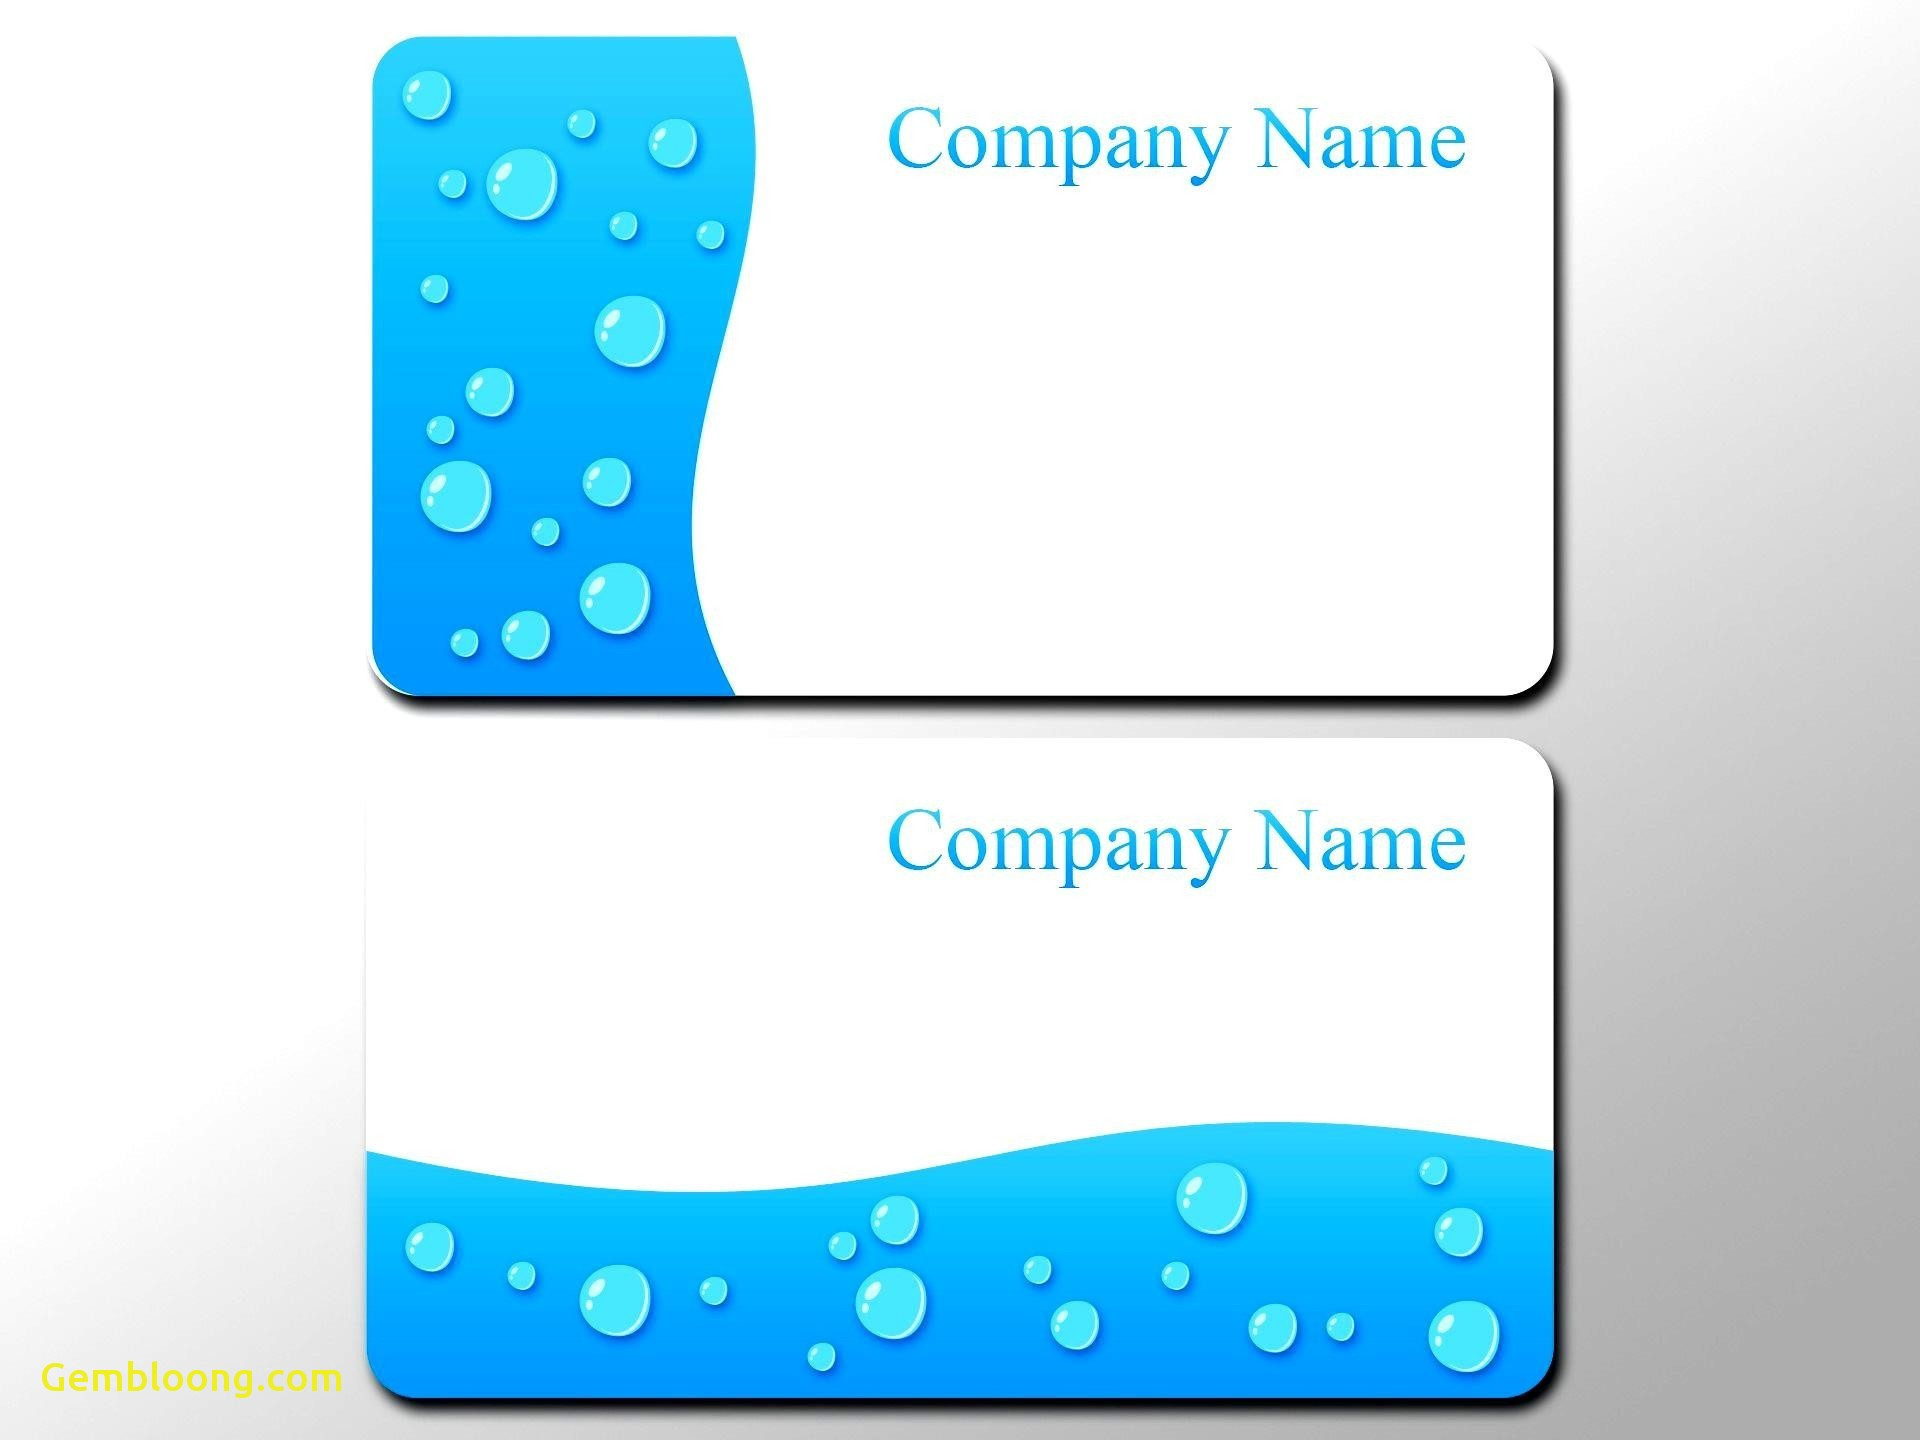 Business Card Photoshop Template Psd Awesome 016 Business In Blank Business Card Template Download